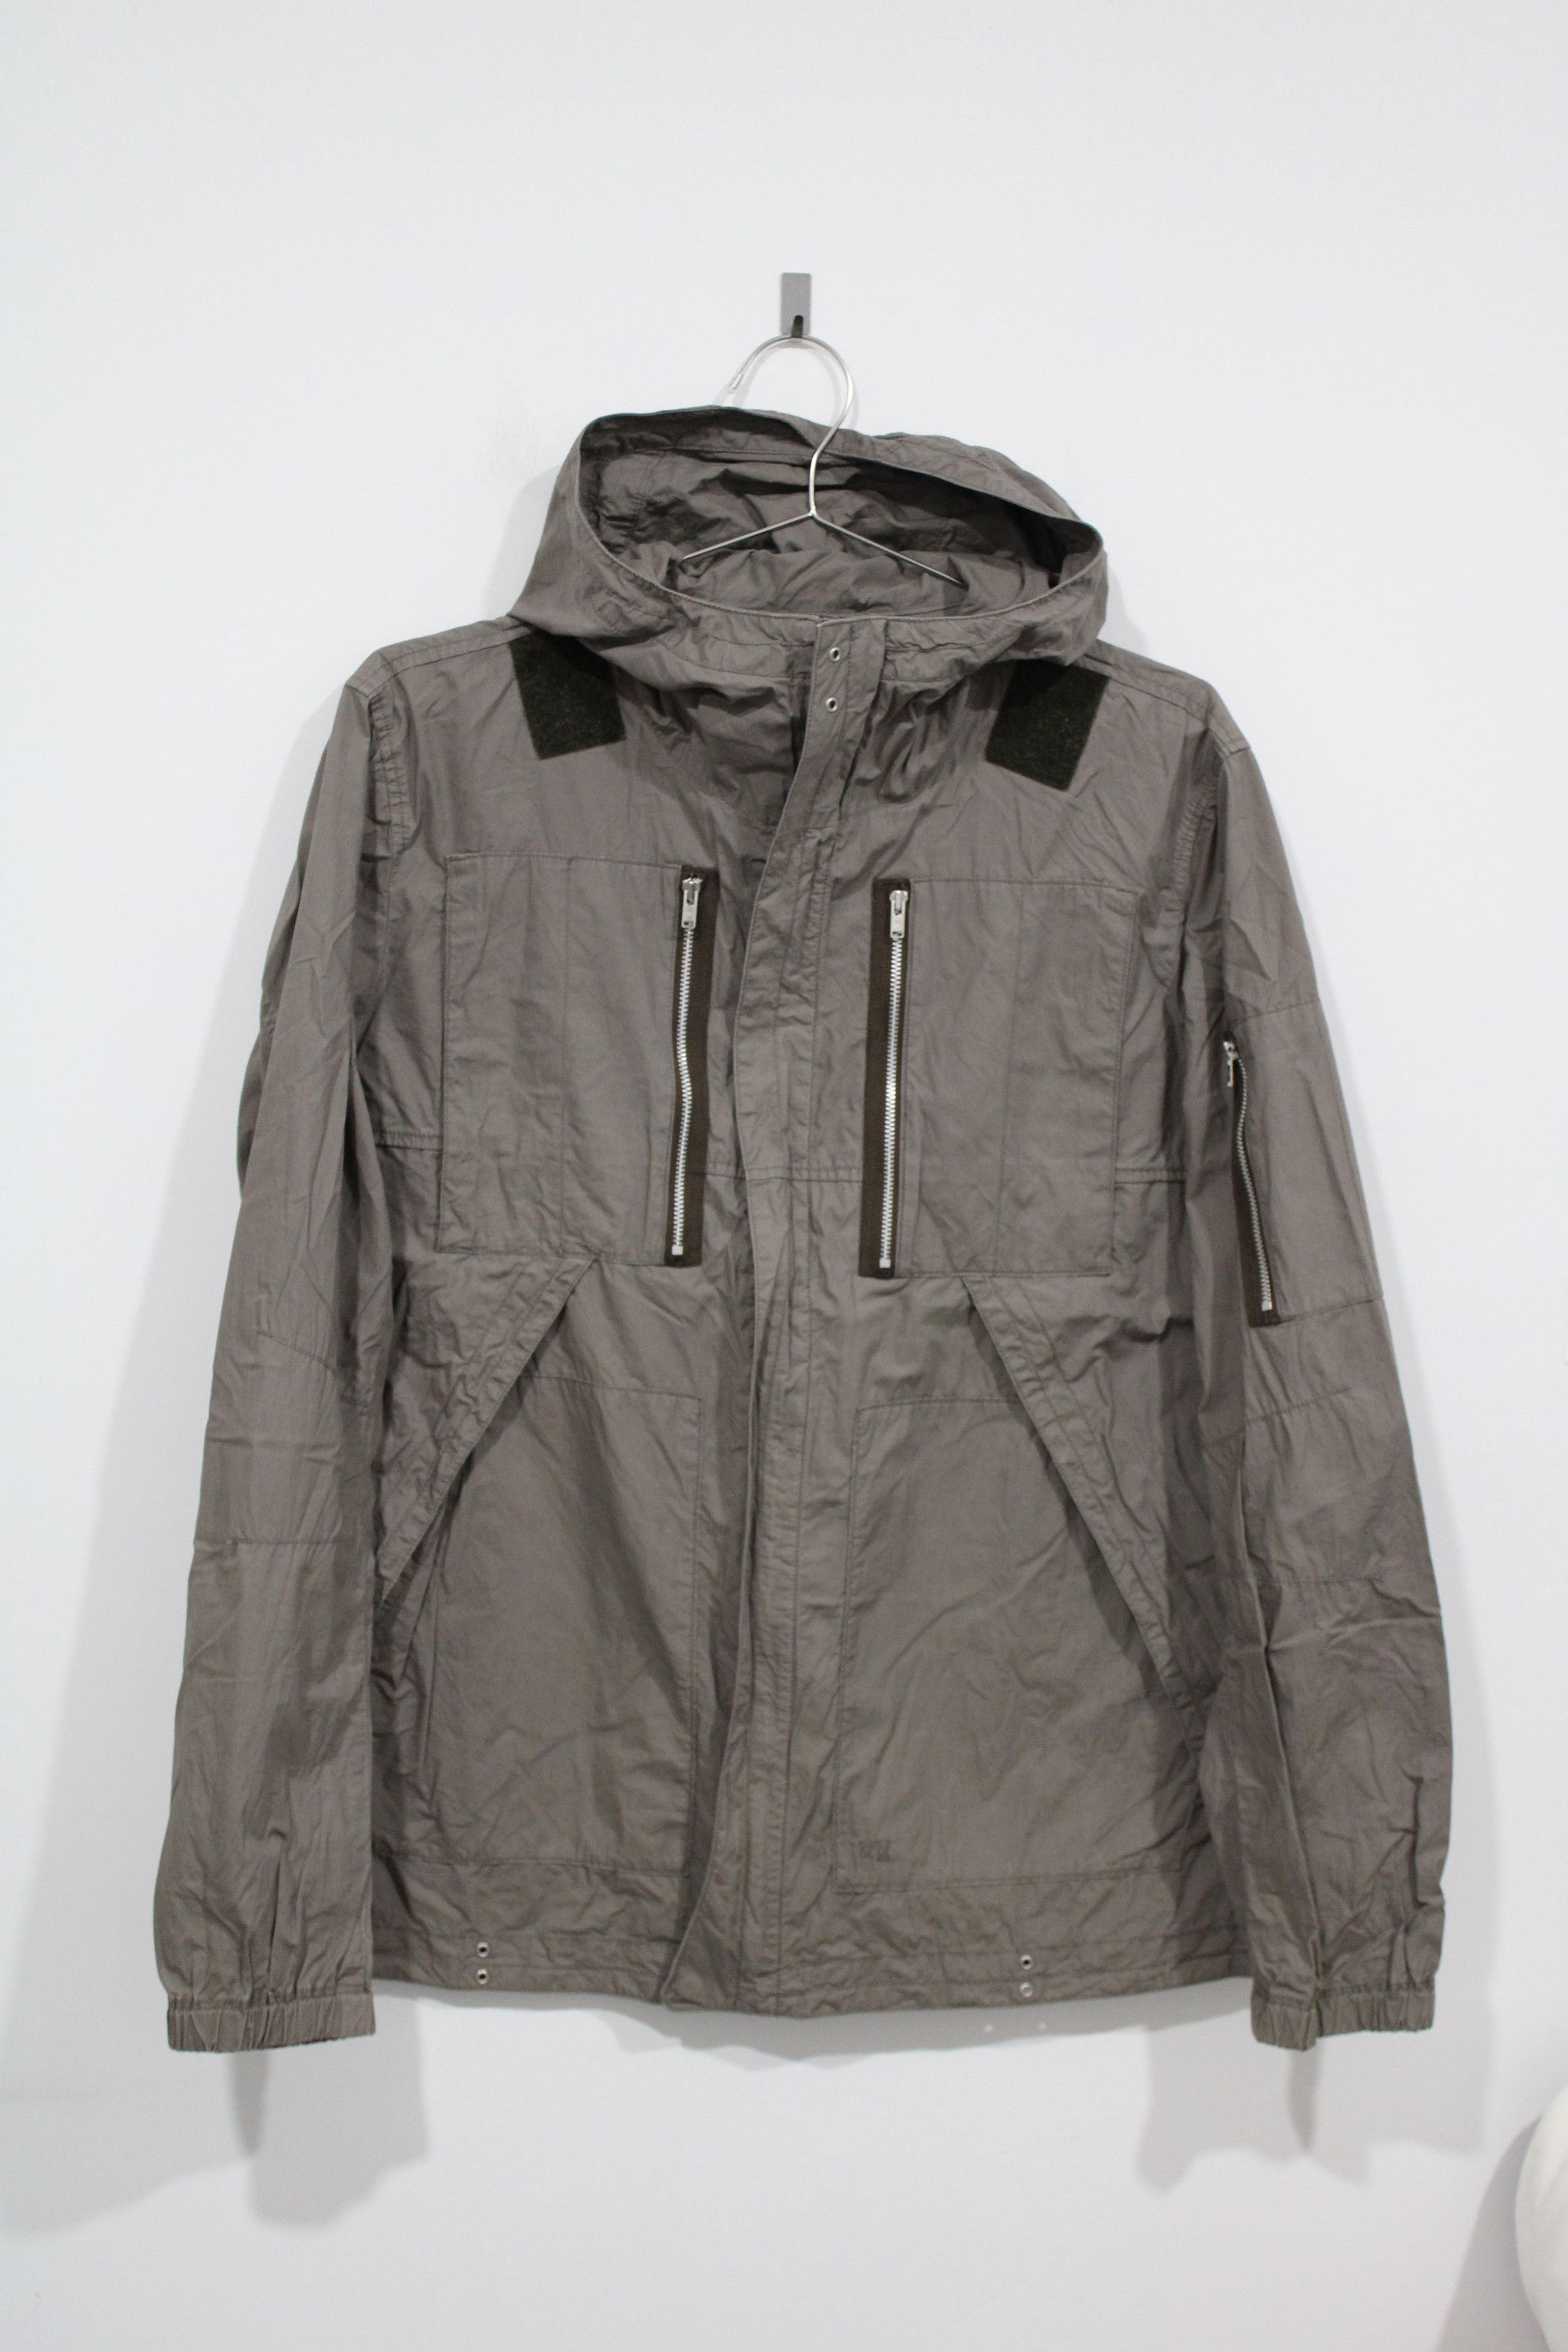 Undercover Uniqlo X Undercover Jun Takahashi Light Brown Jacket | Grailed